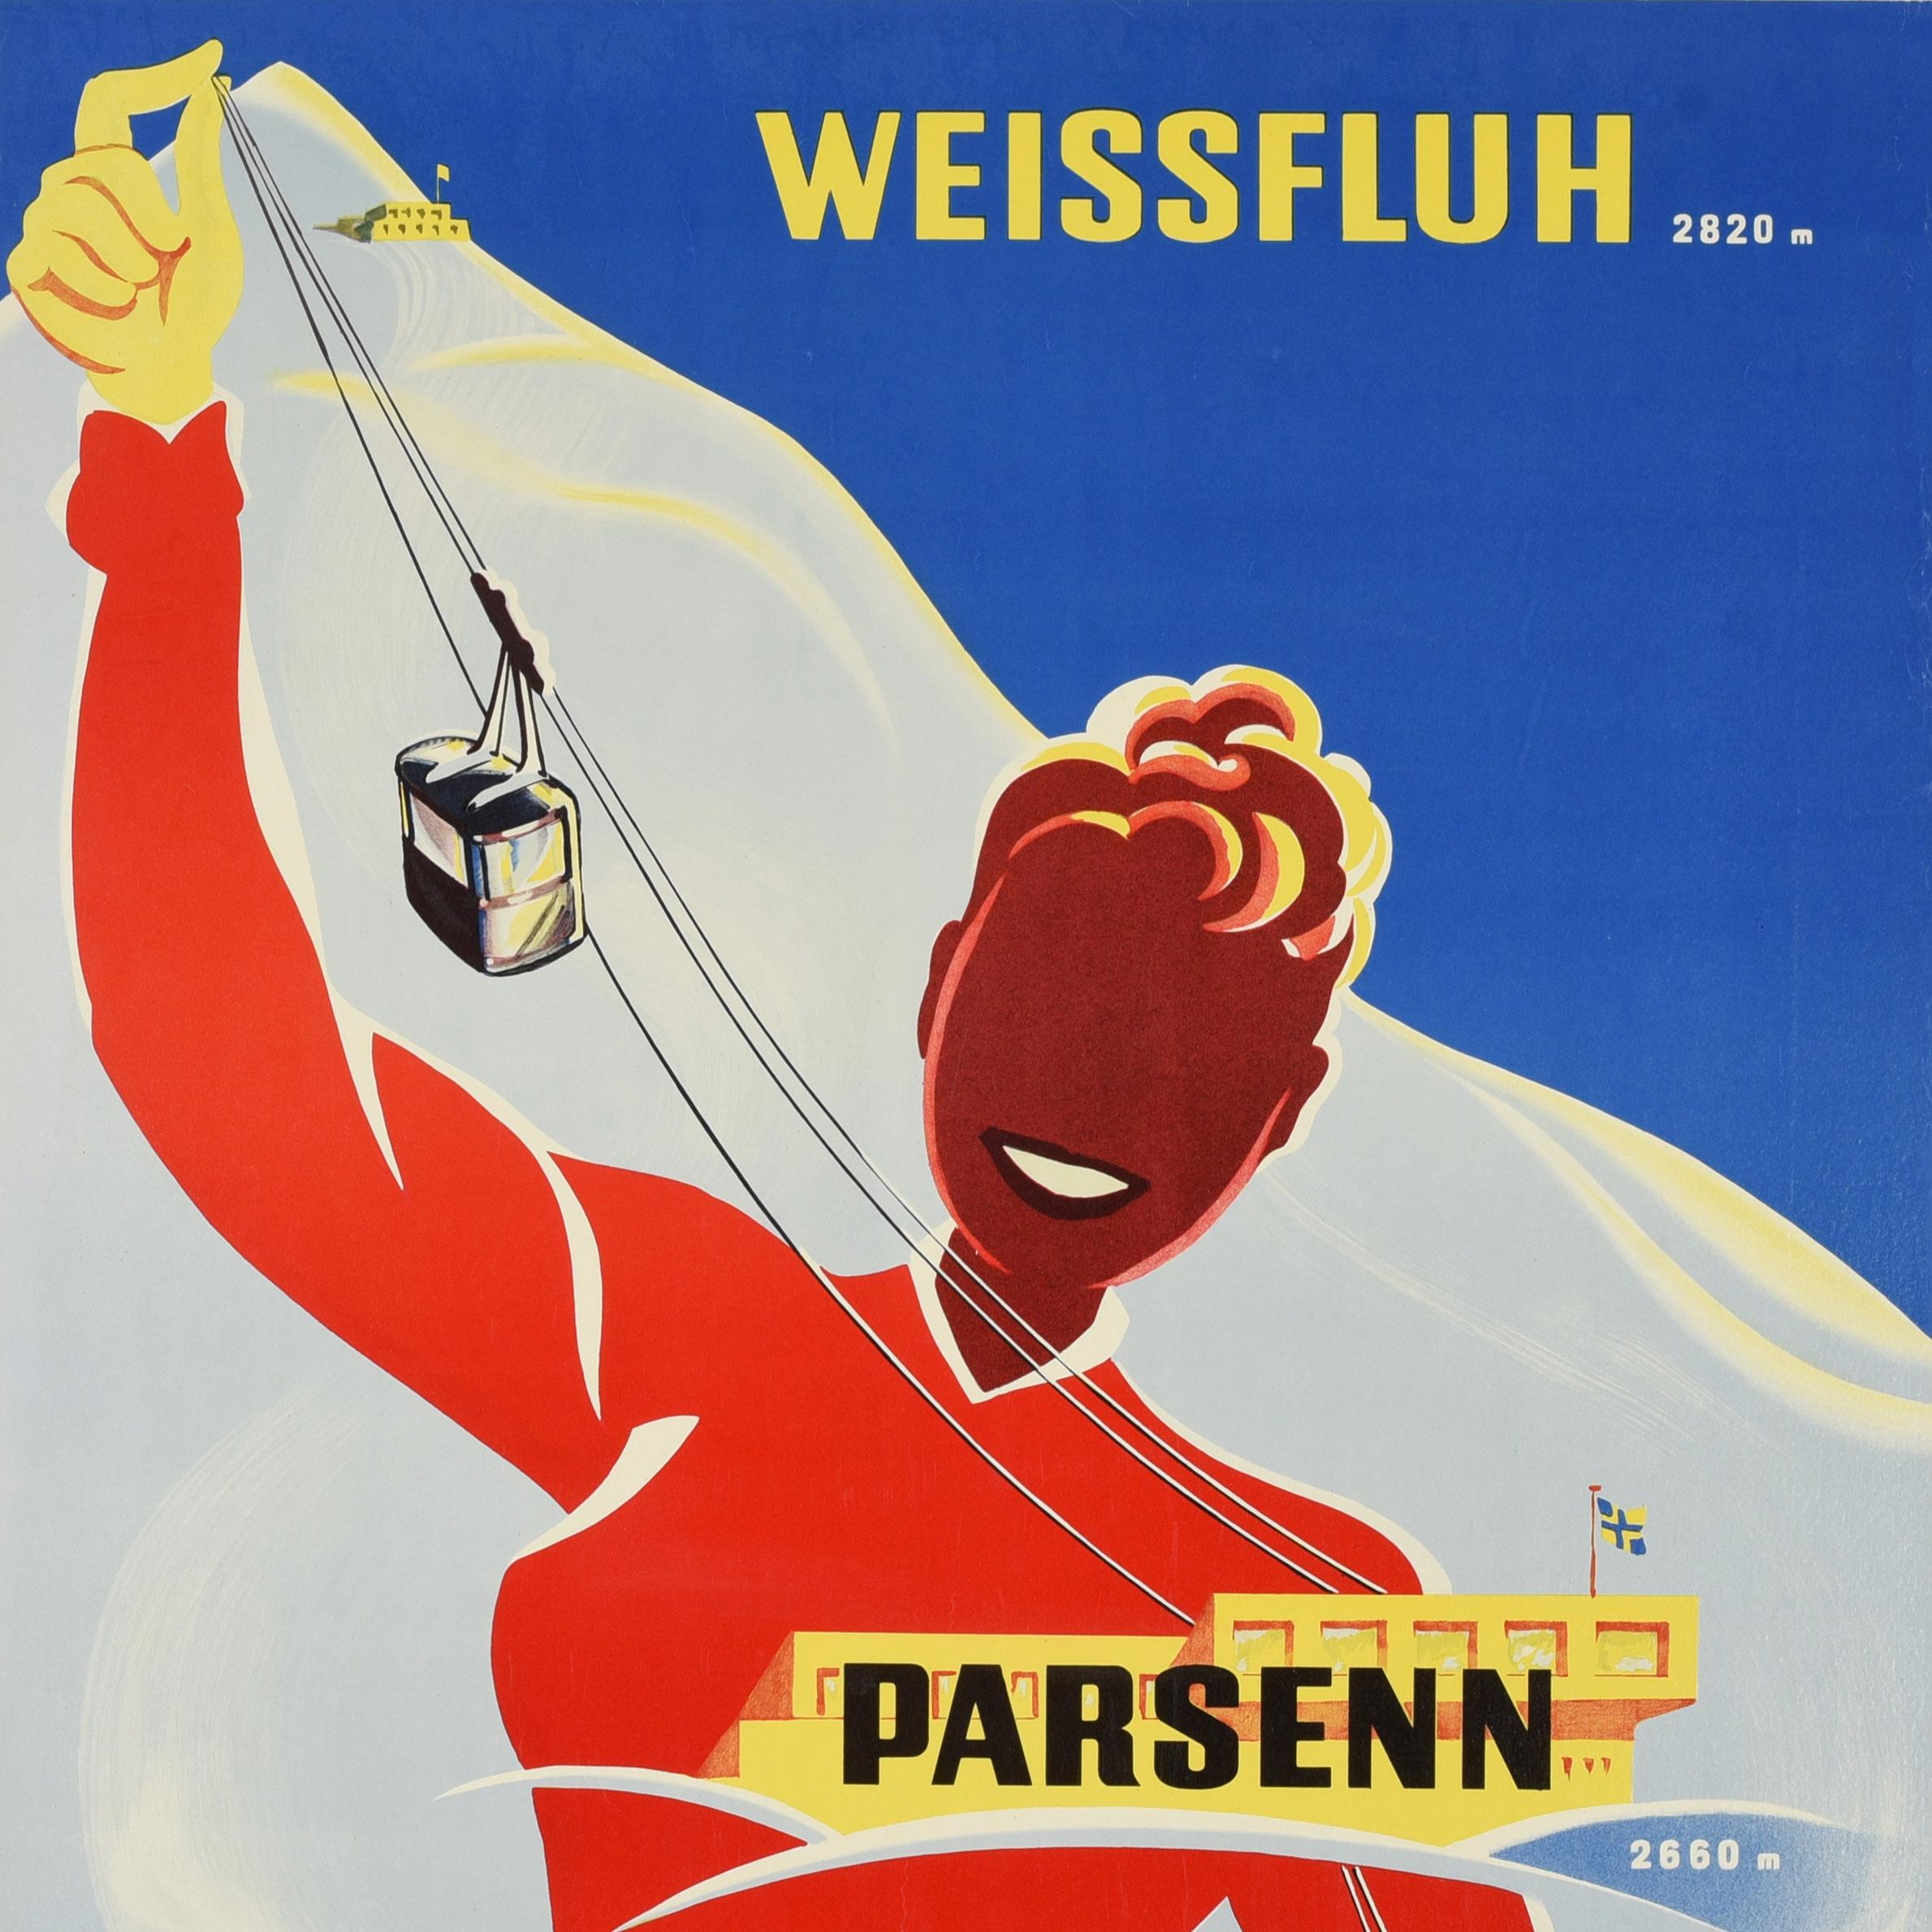 Original vintage ski resort poster for Davos - Weissfluh 2820m Parsenn 2660m Davos 1560m Schweiz Suisse Switzerland. Colourful image of a smiling lady wearing a red top holding the top of a cable car in one hand with a red funicular railway train